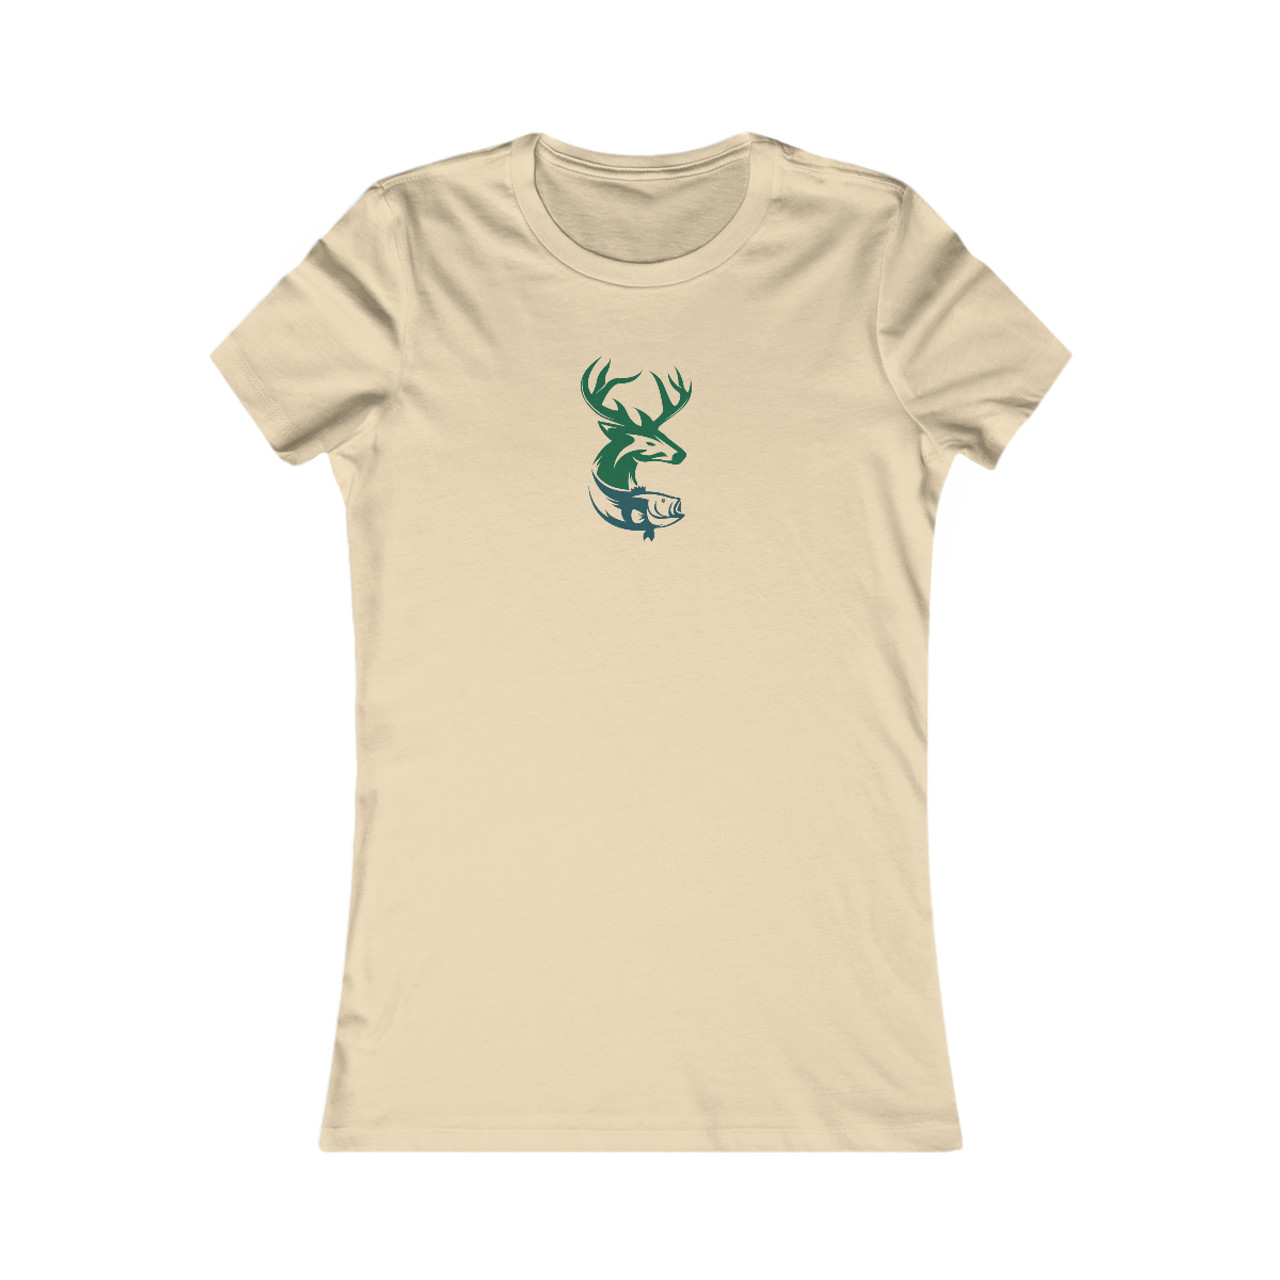 Women's Hunting and Fishing Tee - Lure Outdoors